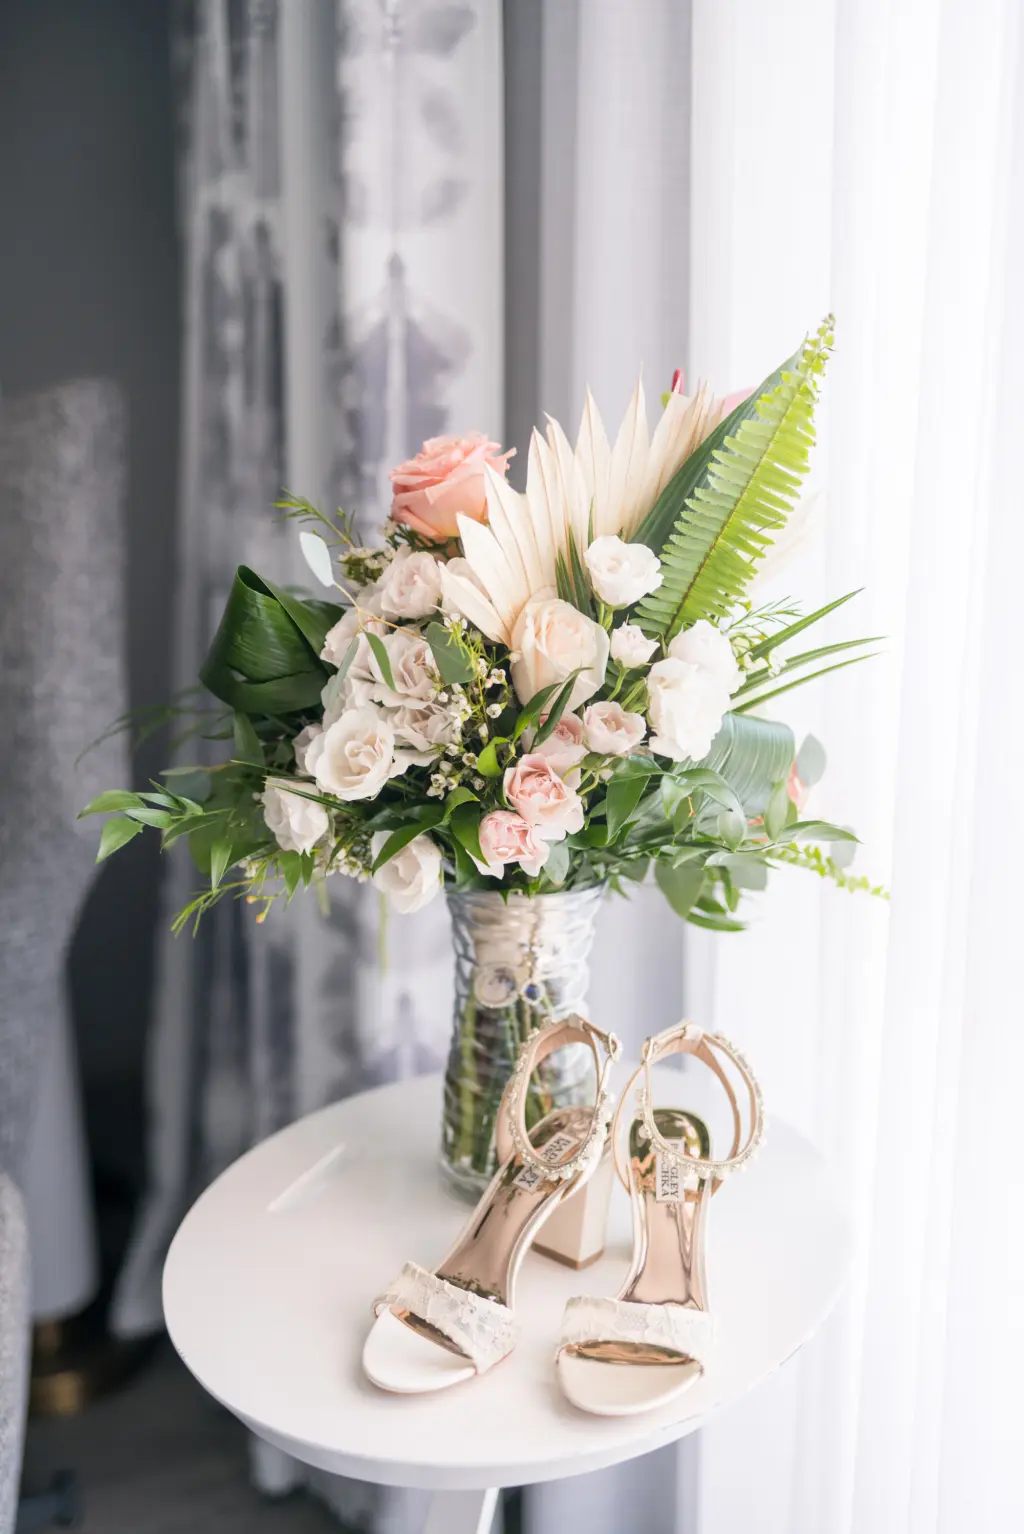 Tropical Wedding Bouquet with Pink and White Roses, Ferns, and Greenery | Tampa Bay Wedding Planner and Florist Lemon Drops Weddings and Events